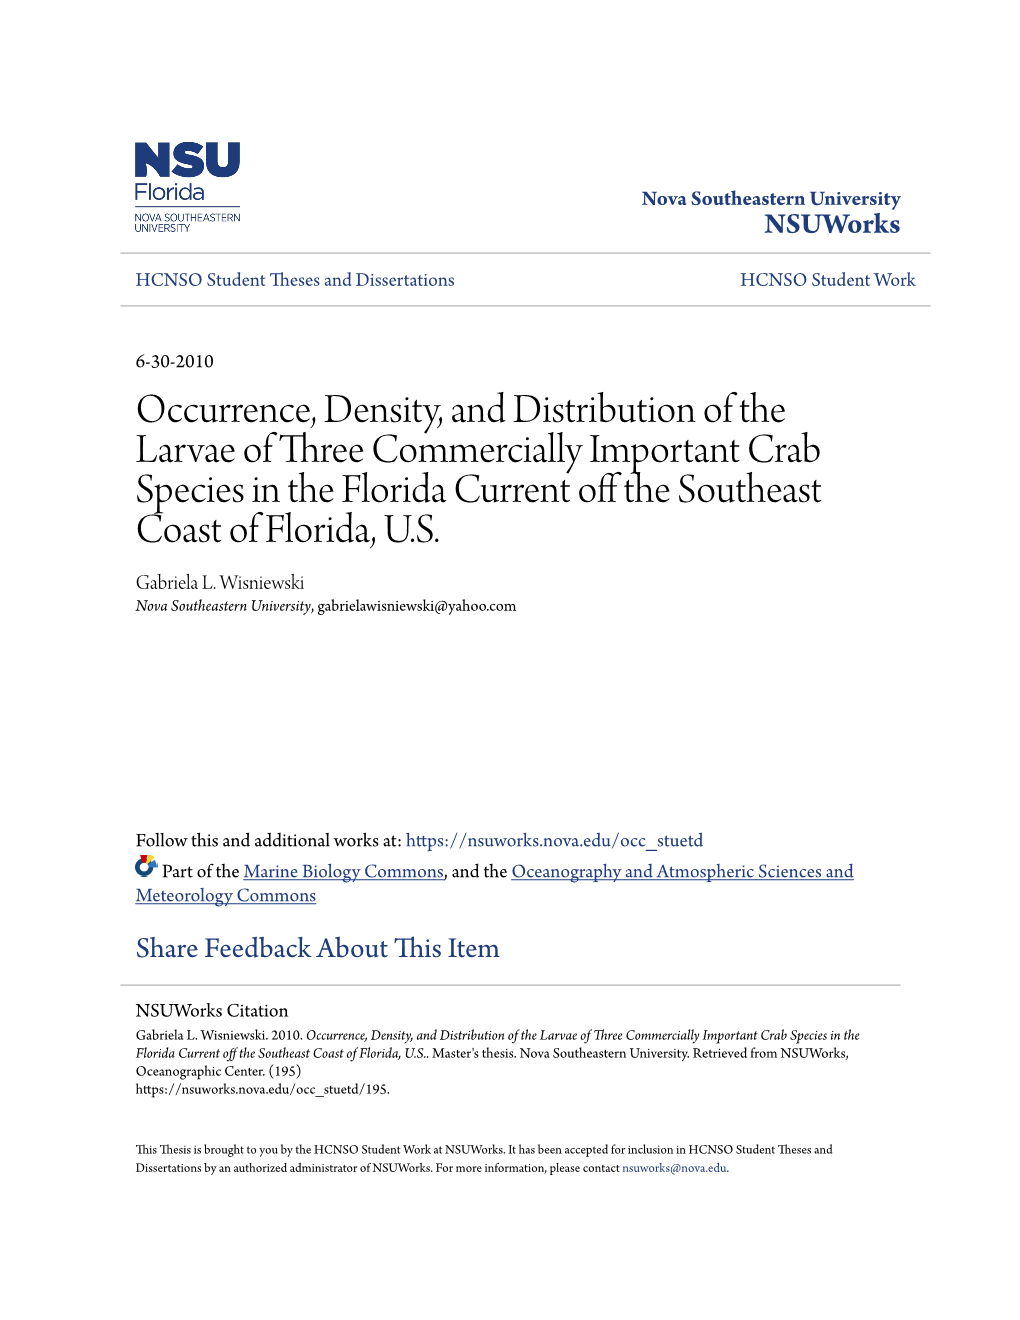 Occurrence, Density, and Distribution of the Larvae of Three Commercially Important Crab Species in the Florida Current Off the Outhes Ast Coast of Florida, U.S